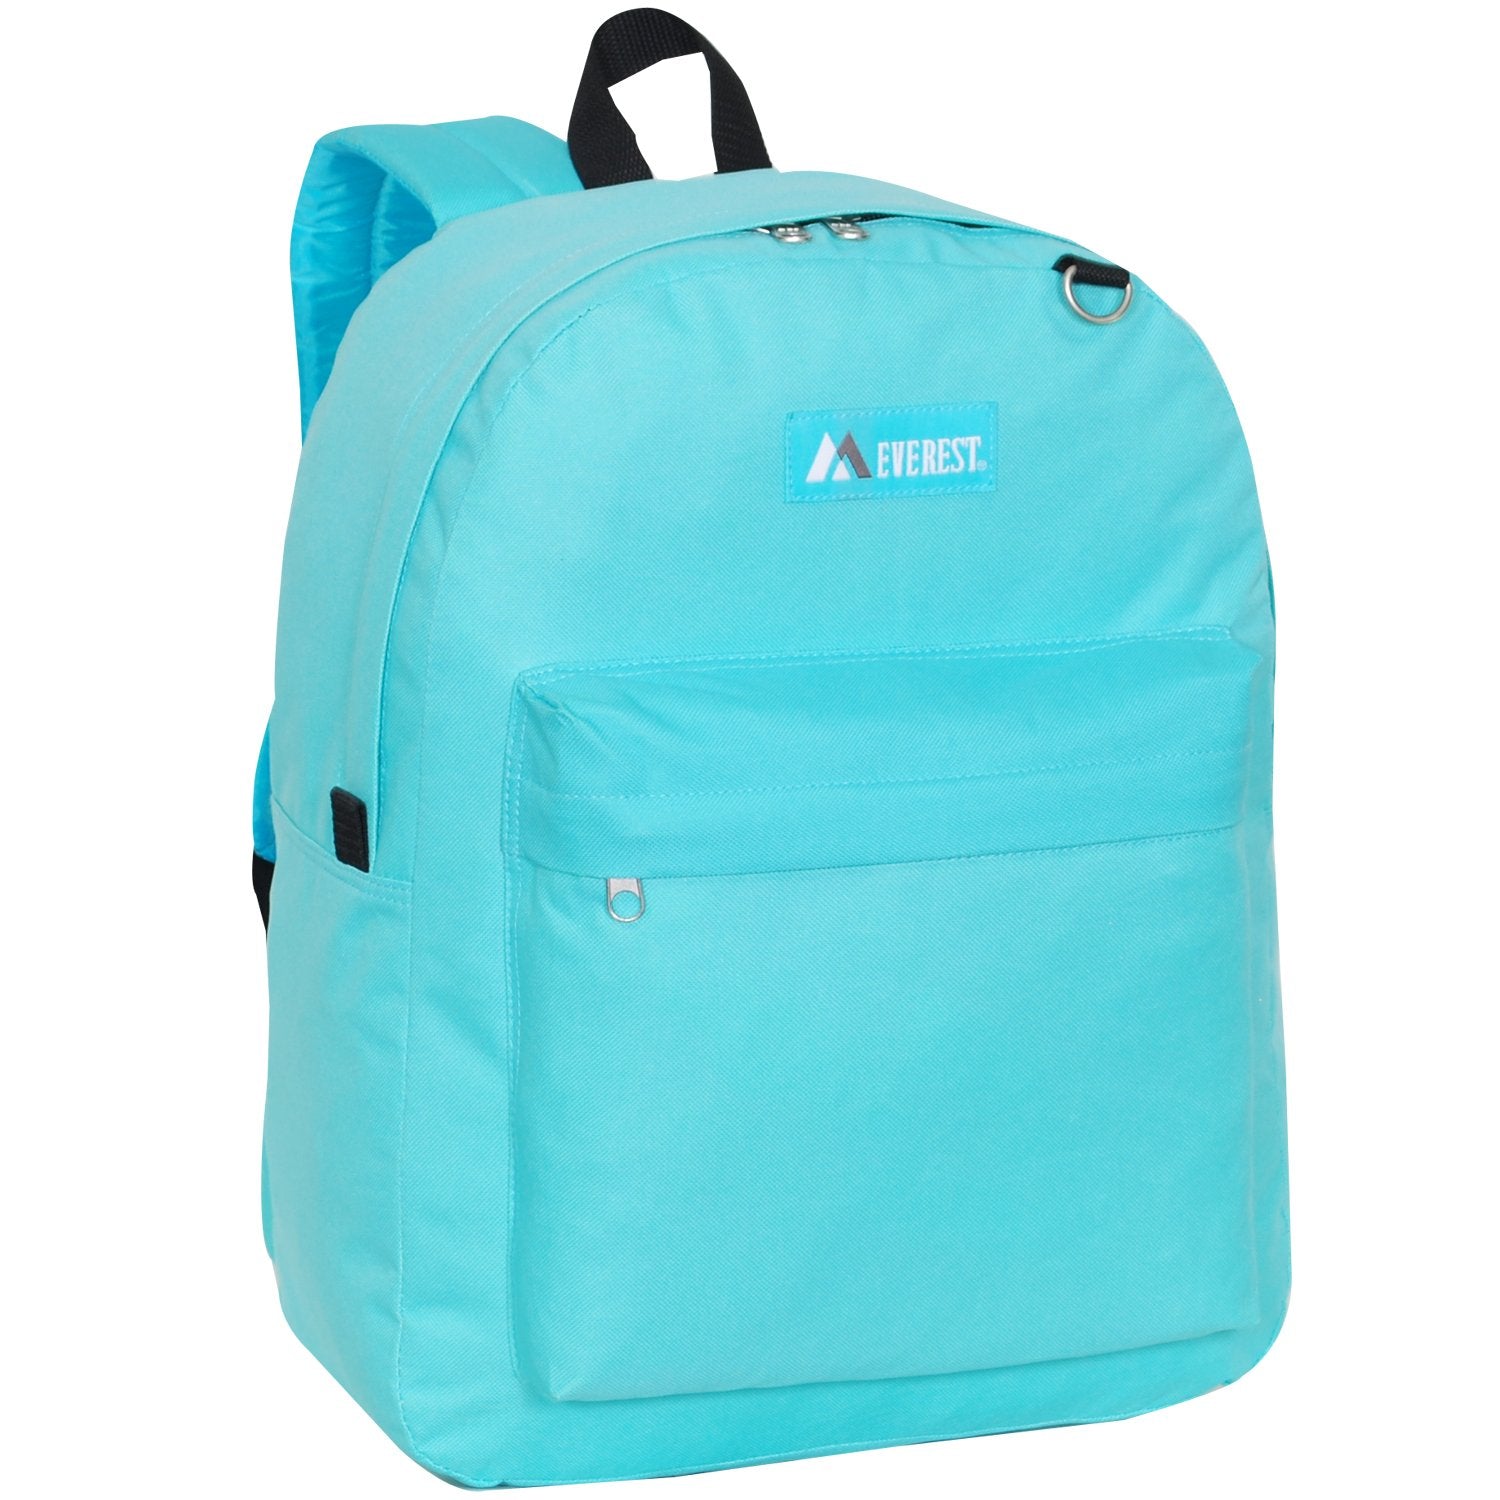 Everest-Classic Backpack-eSafety Supplies, Inc